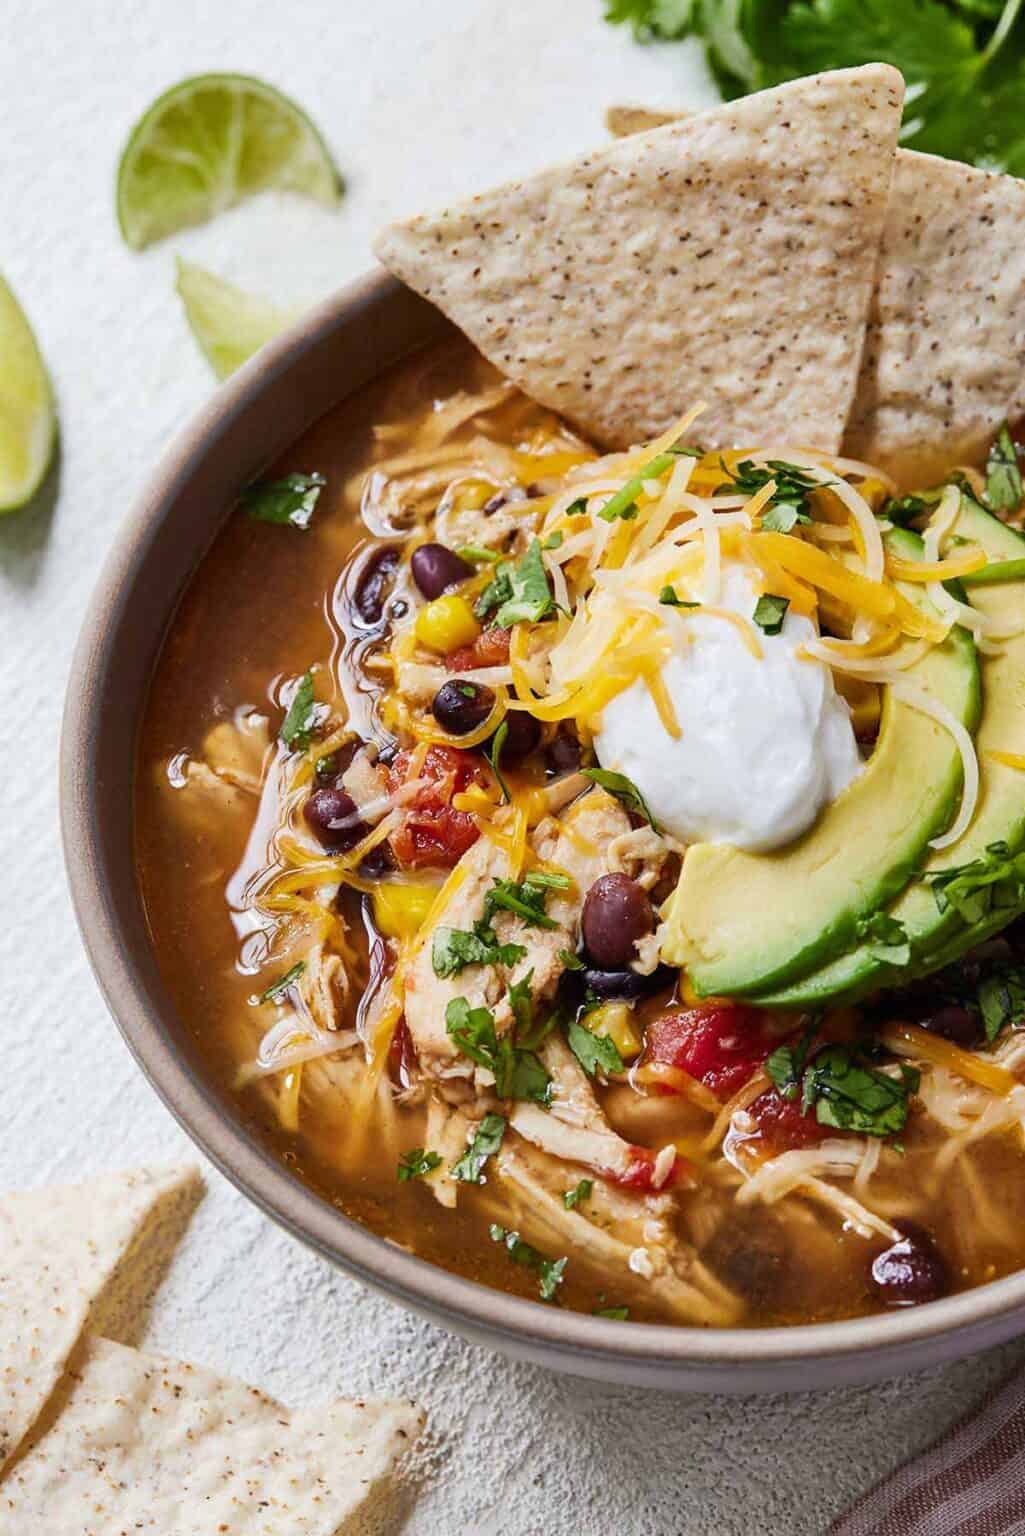 Instant Pot Chicken Tortilla Soup - Cooking With Coit